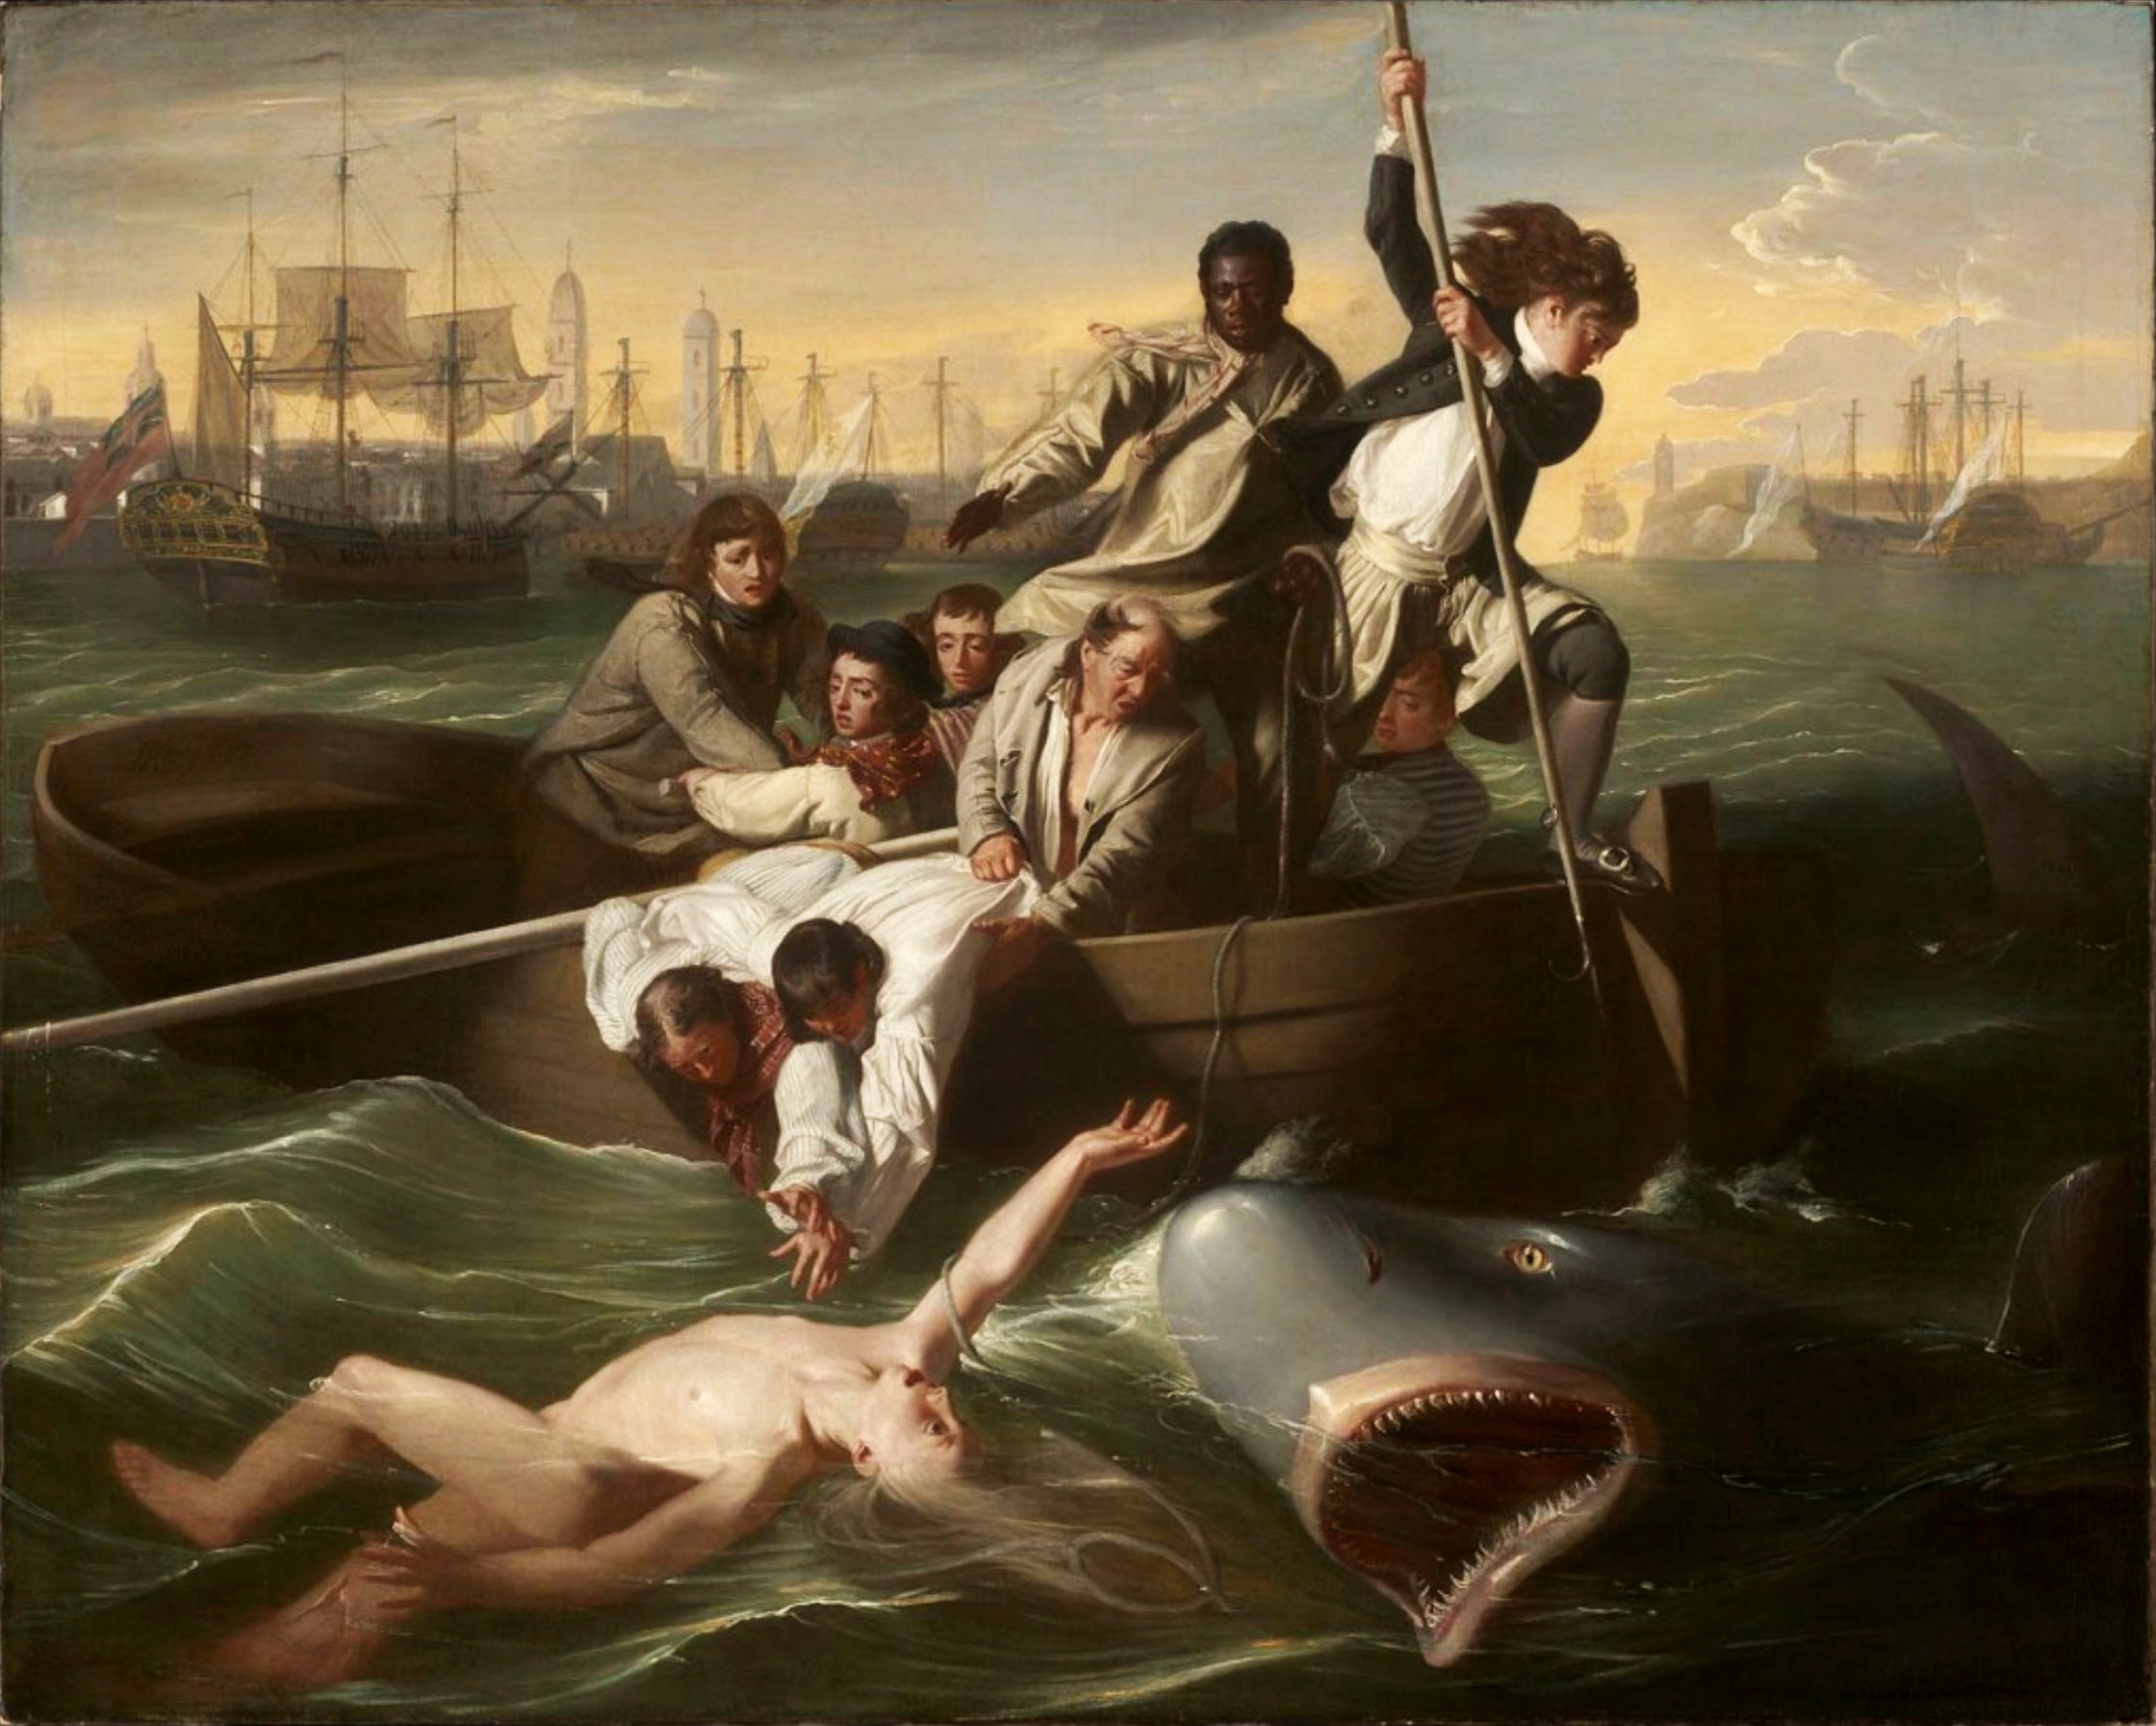 People on a boat attempting to rescue a nude individual from getting eaten by a shark in the ocean